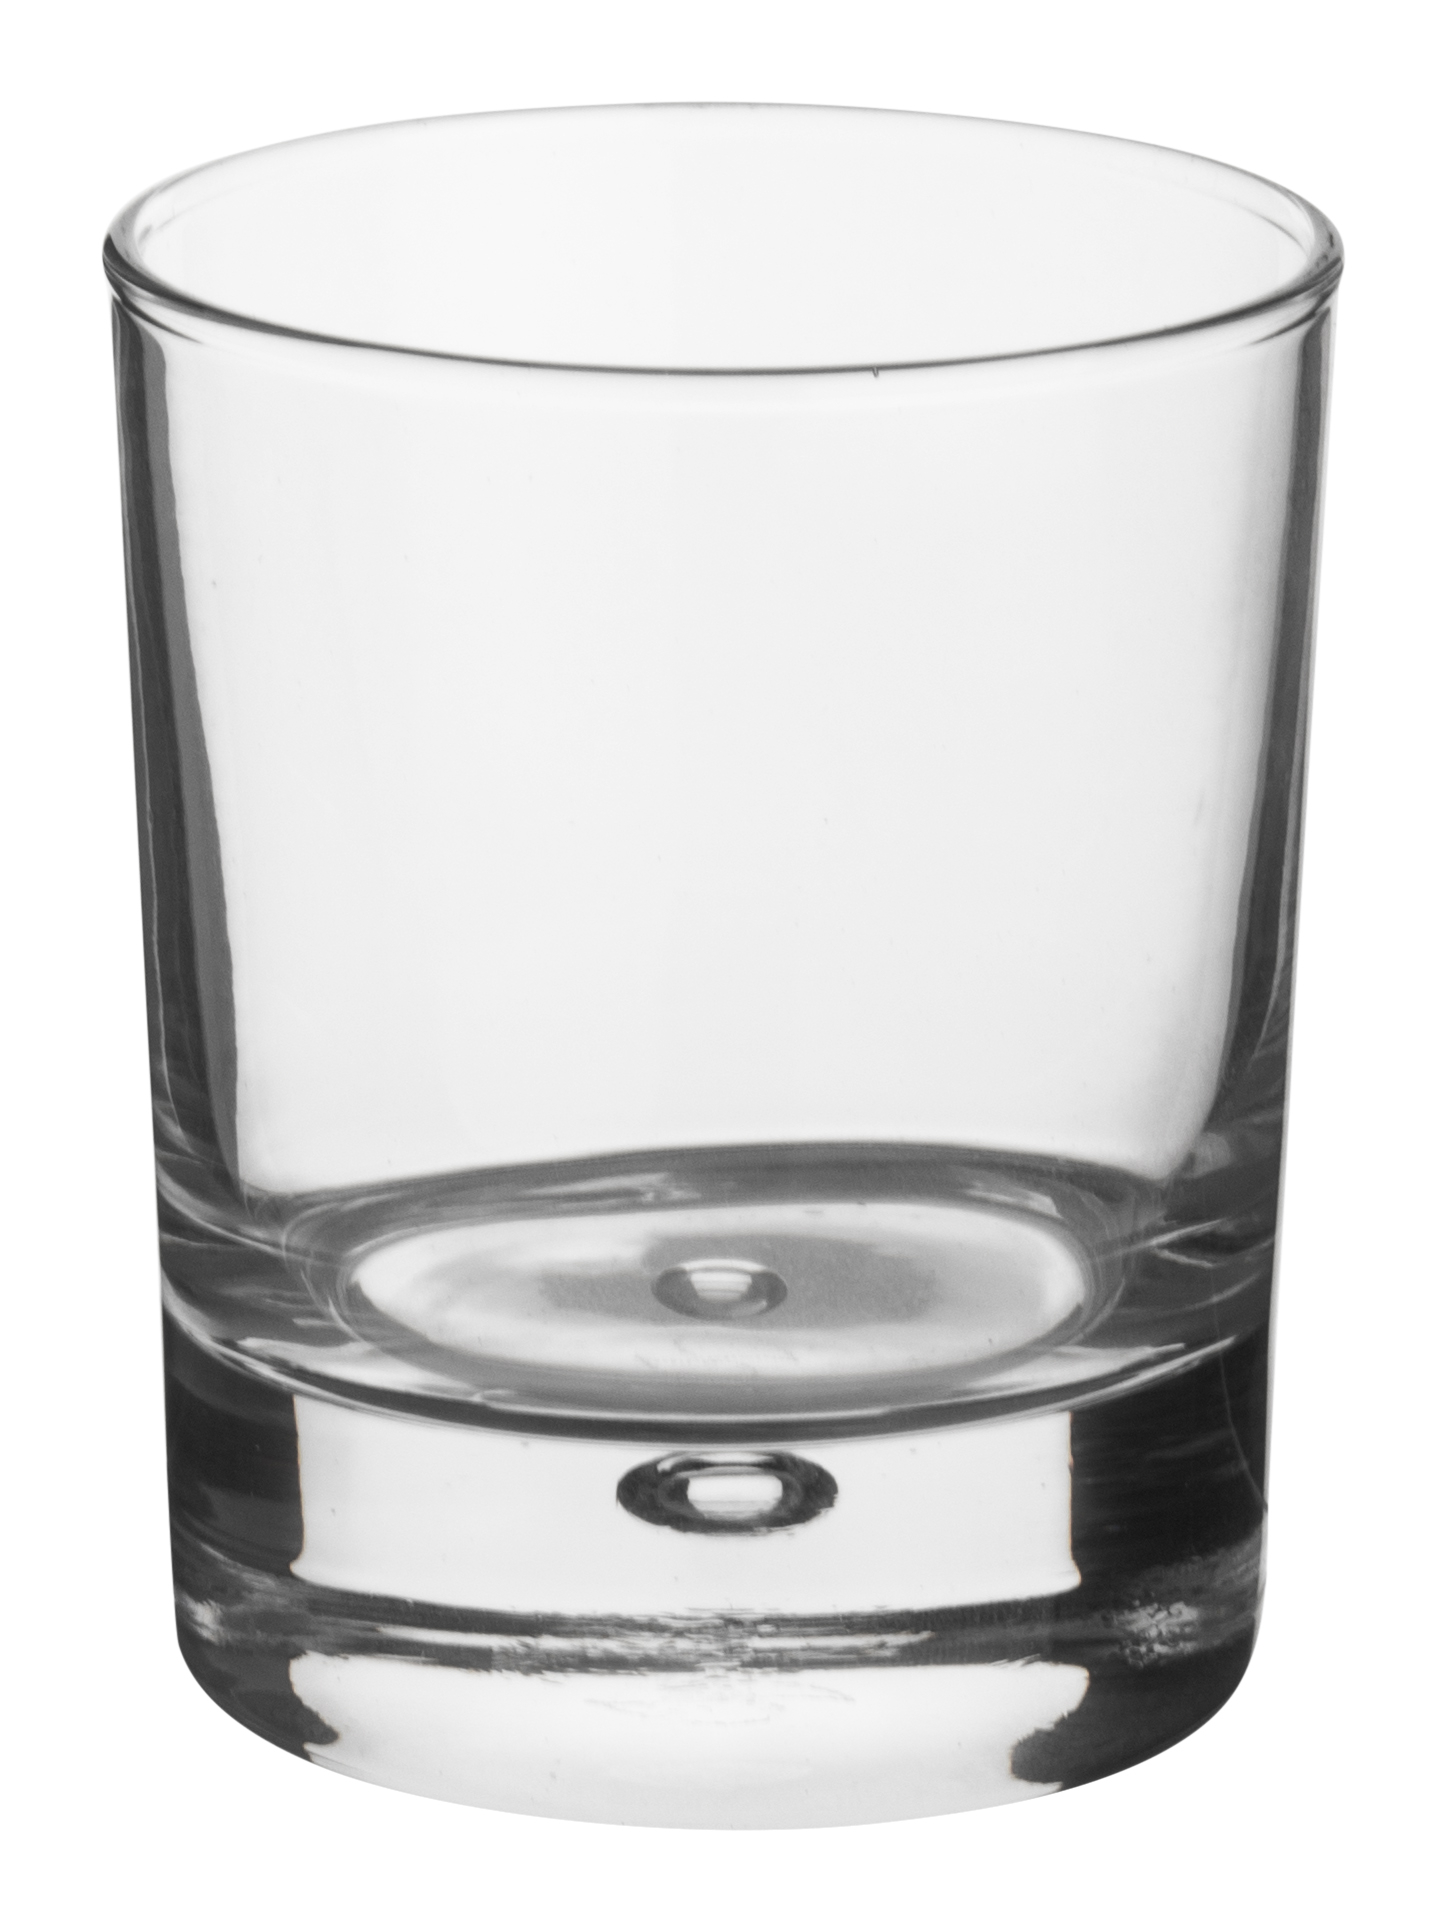 Drinking glass Centra, Pasabahce - 180ml (1 pc.)